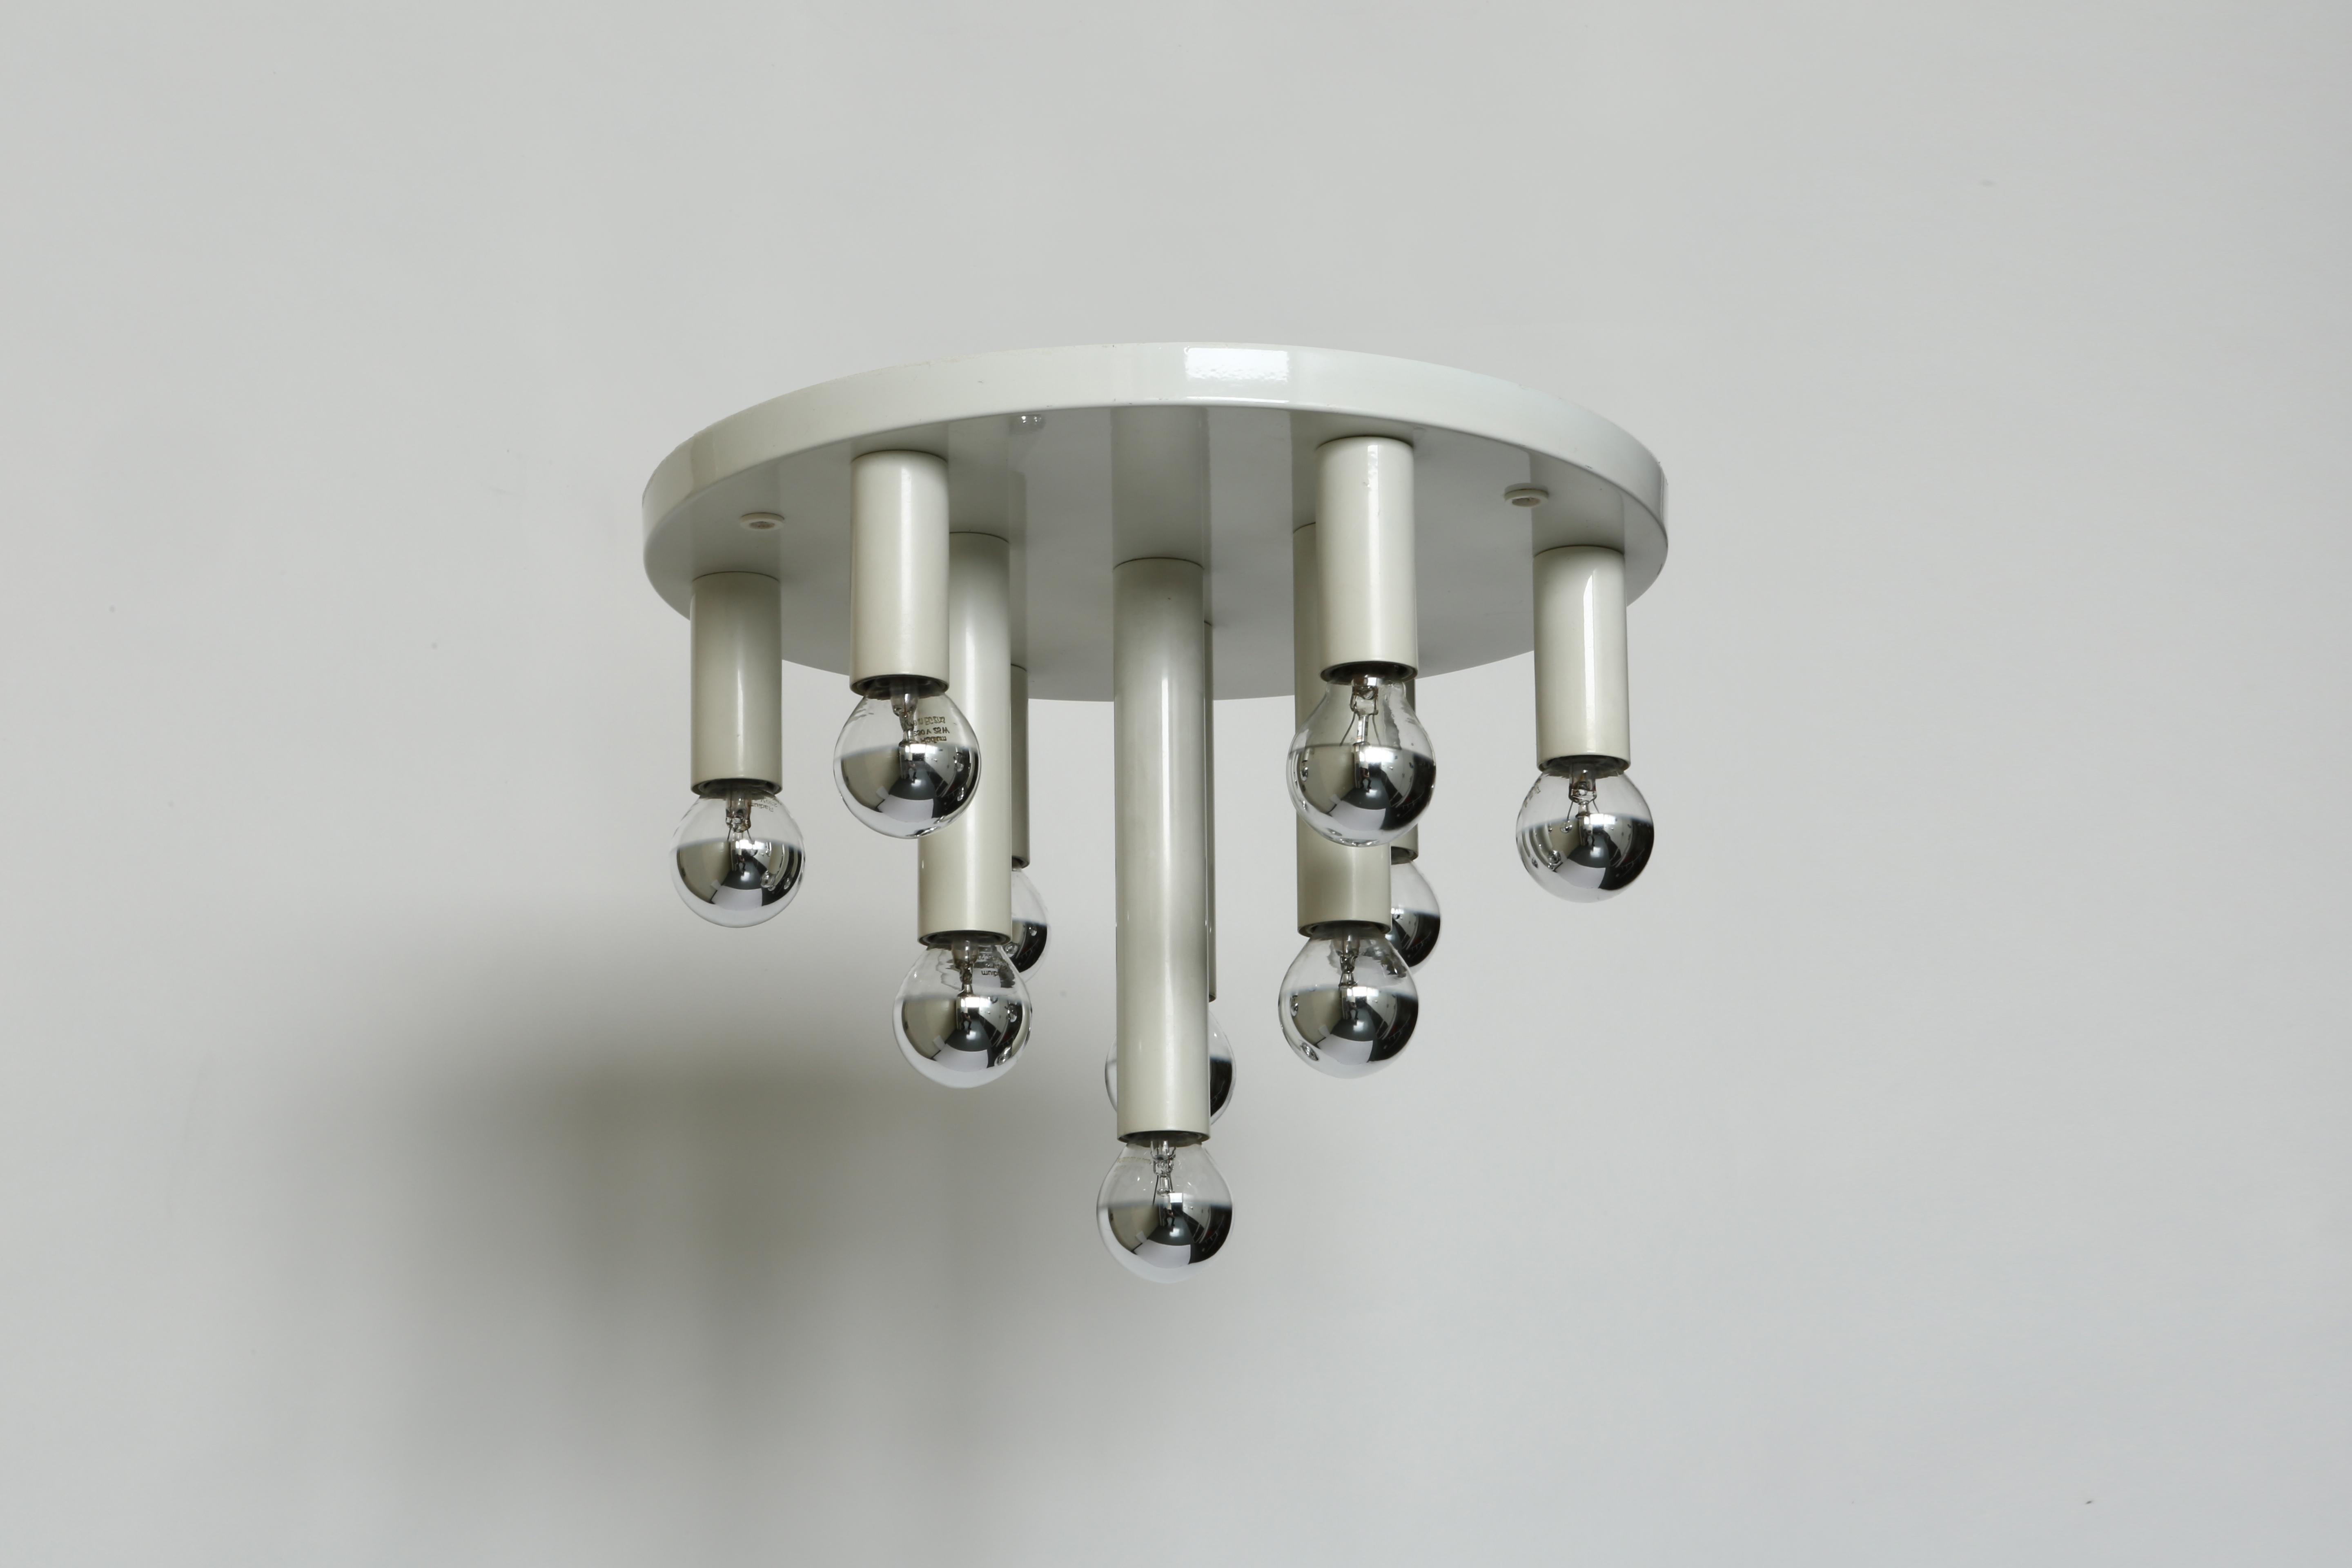 Mid-Century Modern flush mount.
Germany, 1970s.
Enameled metal.
10 candelabra sockets.
Also available in black.